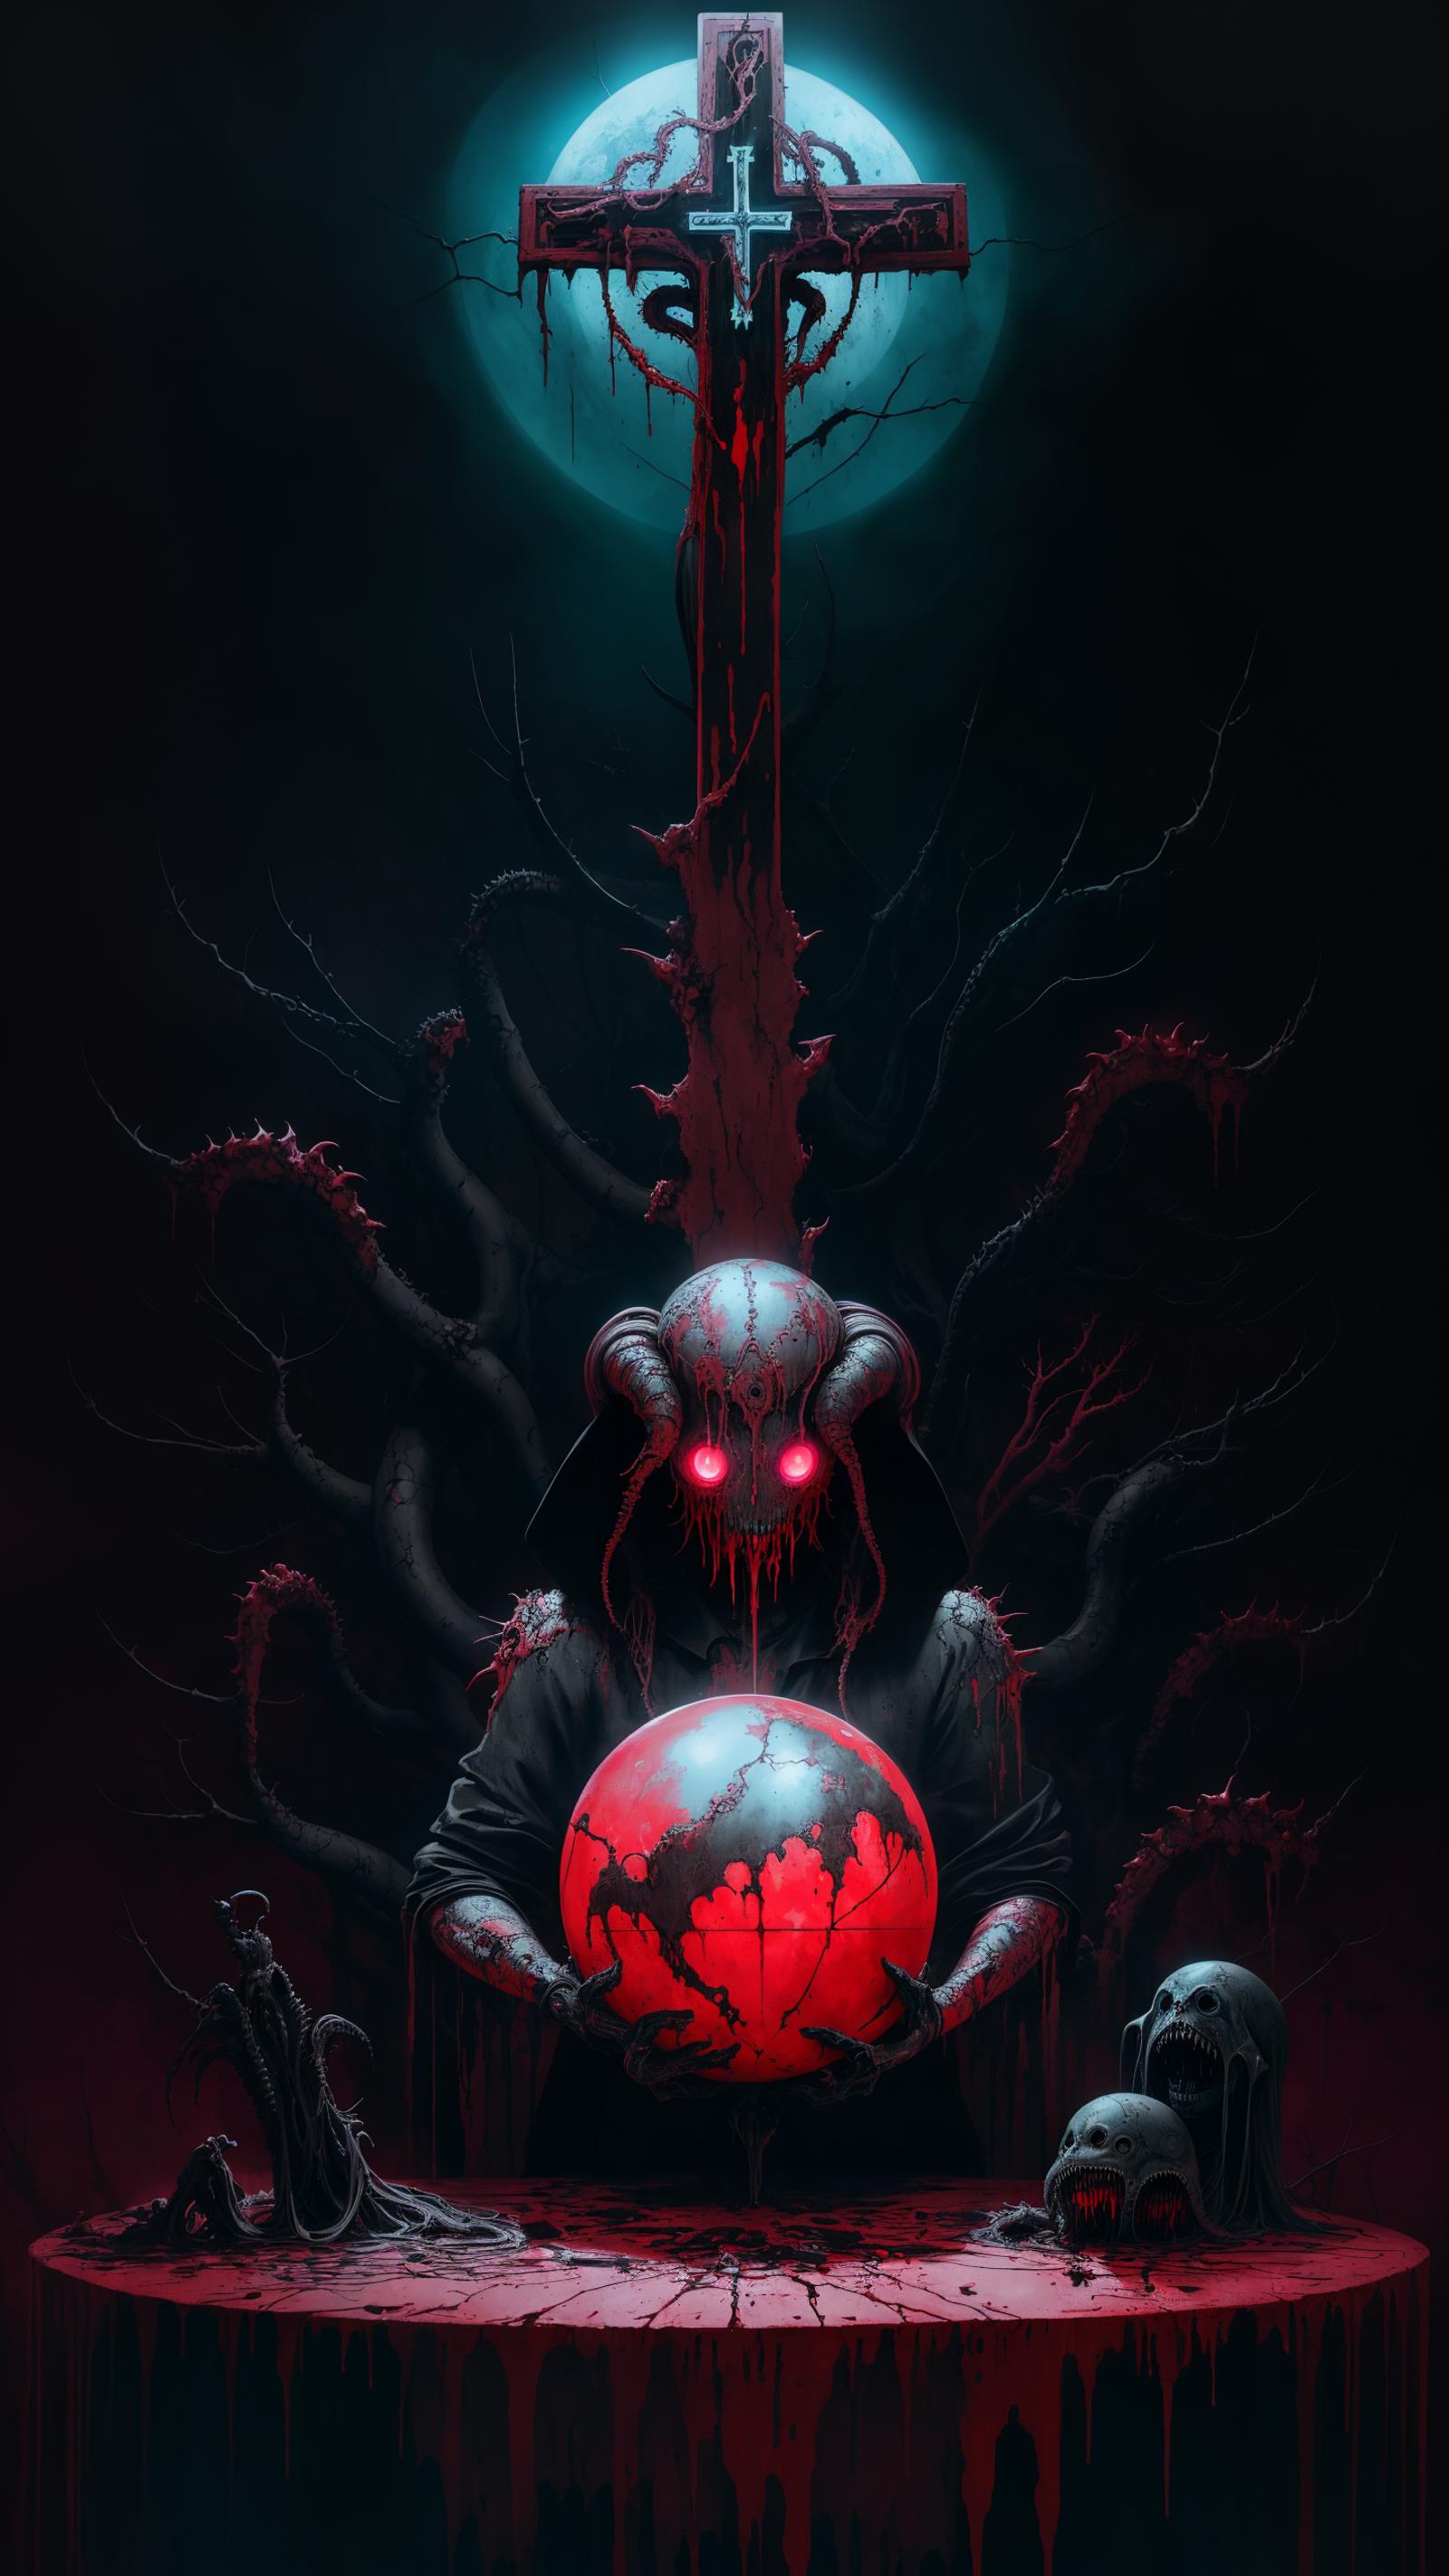 A Demon-like figure holding a bloody sphere of the world in its hands.